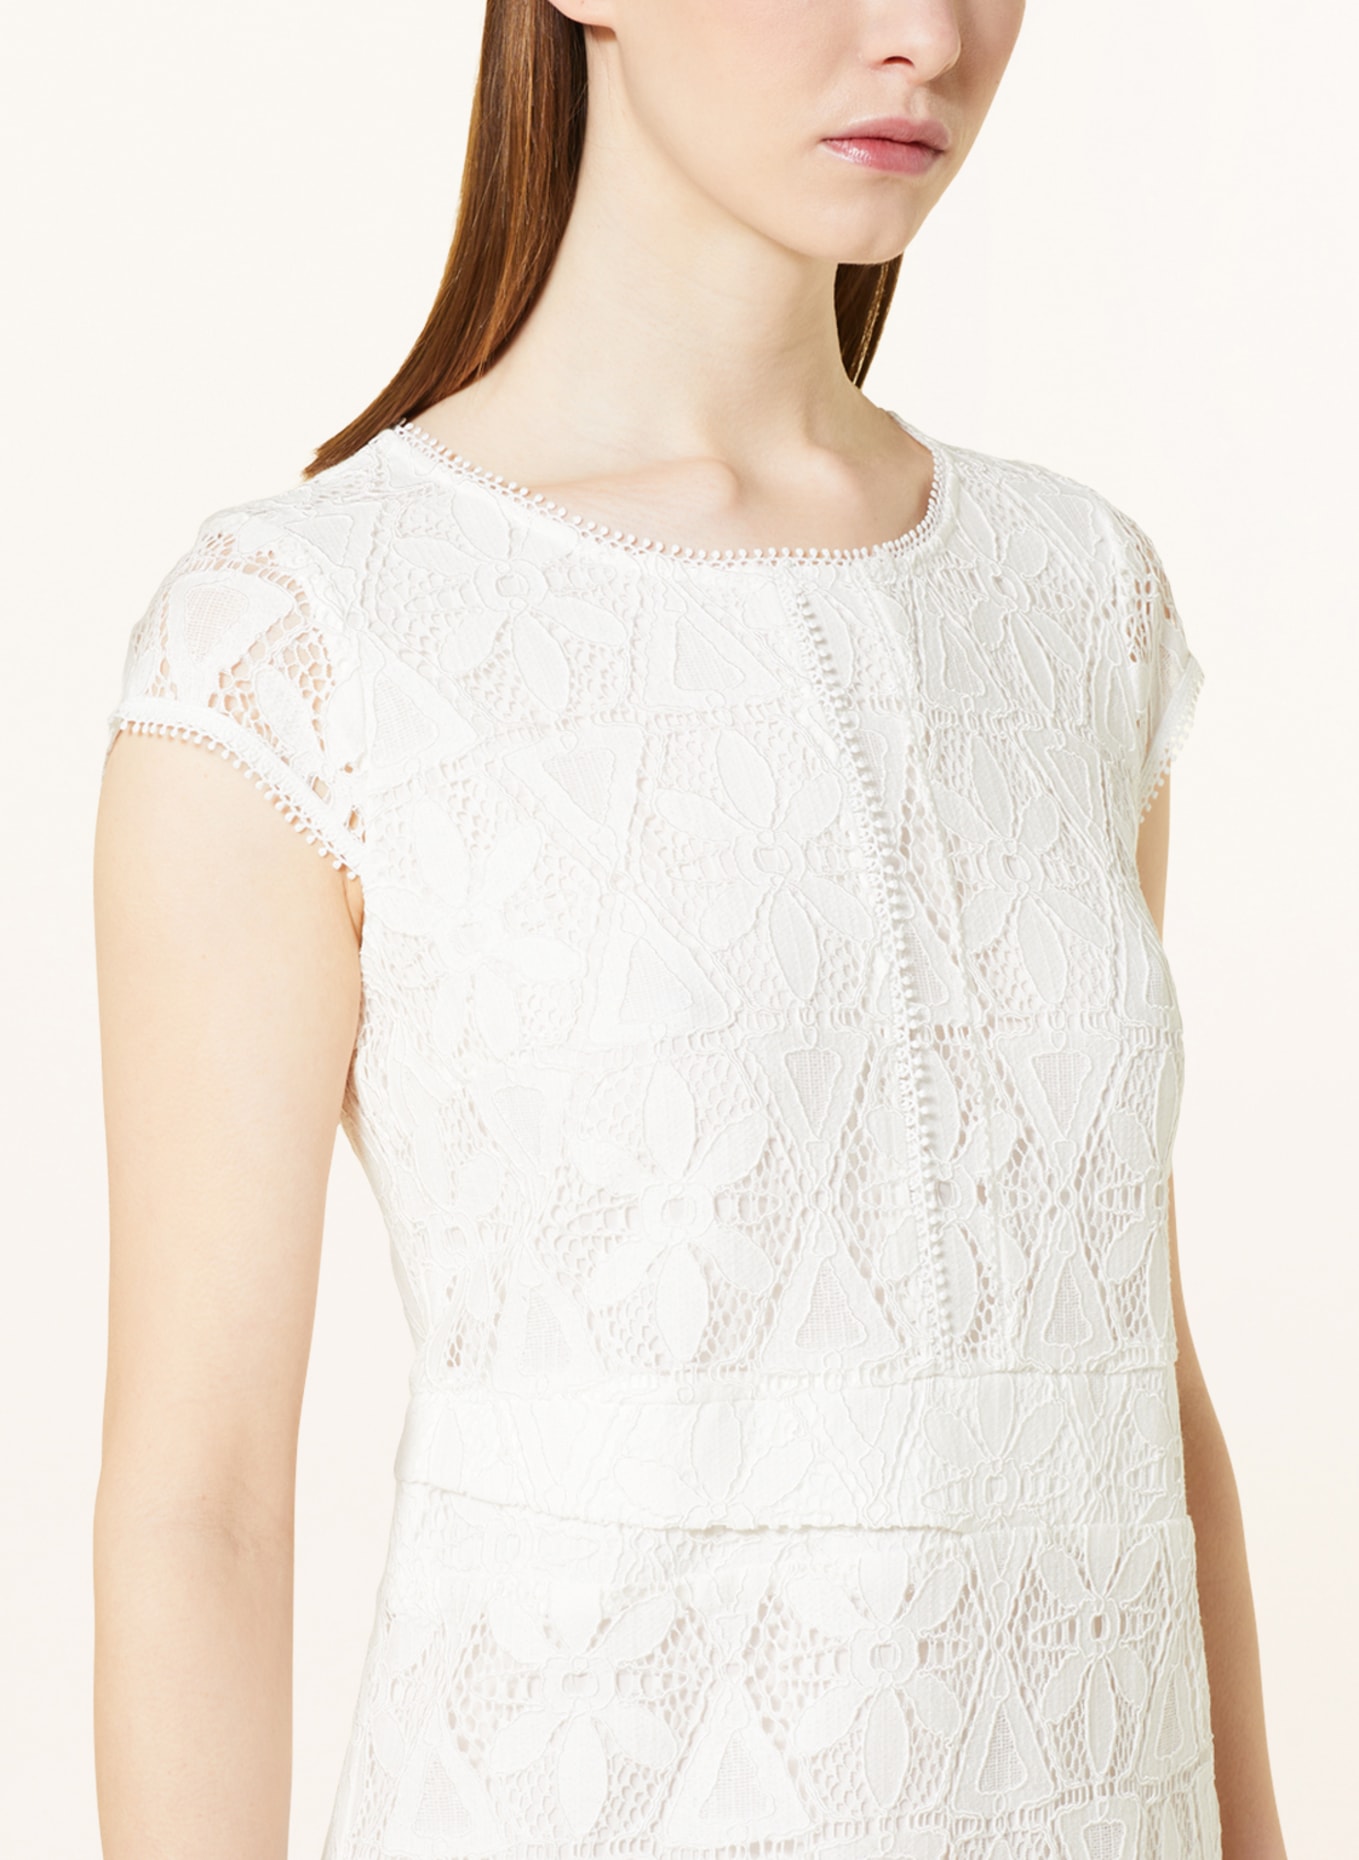 BETTY&CO Sheath dress made of lace, Color: WHITE (Image 4)